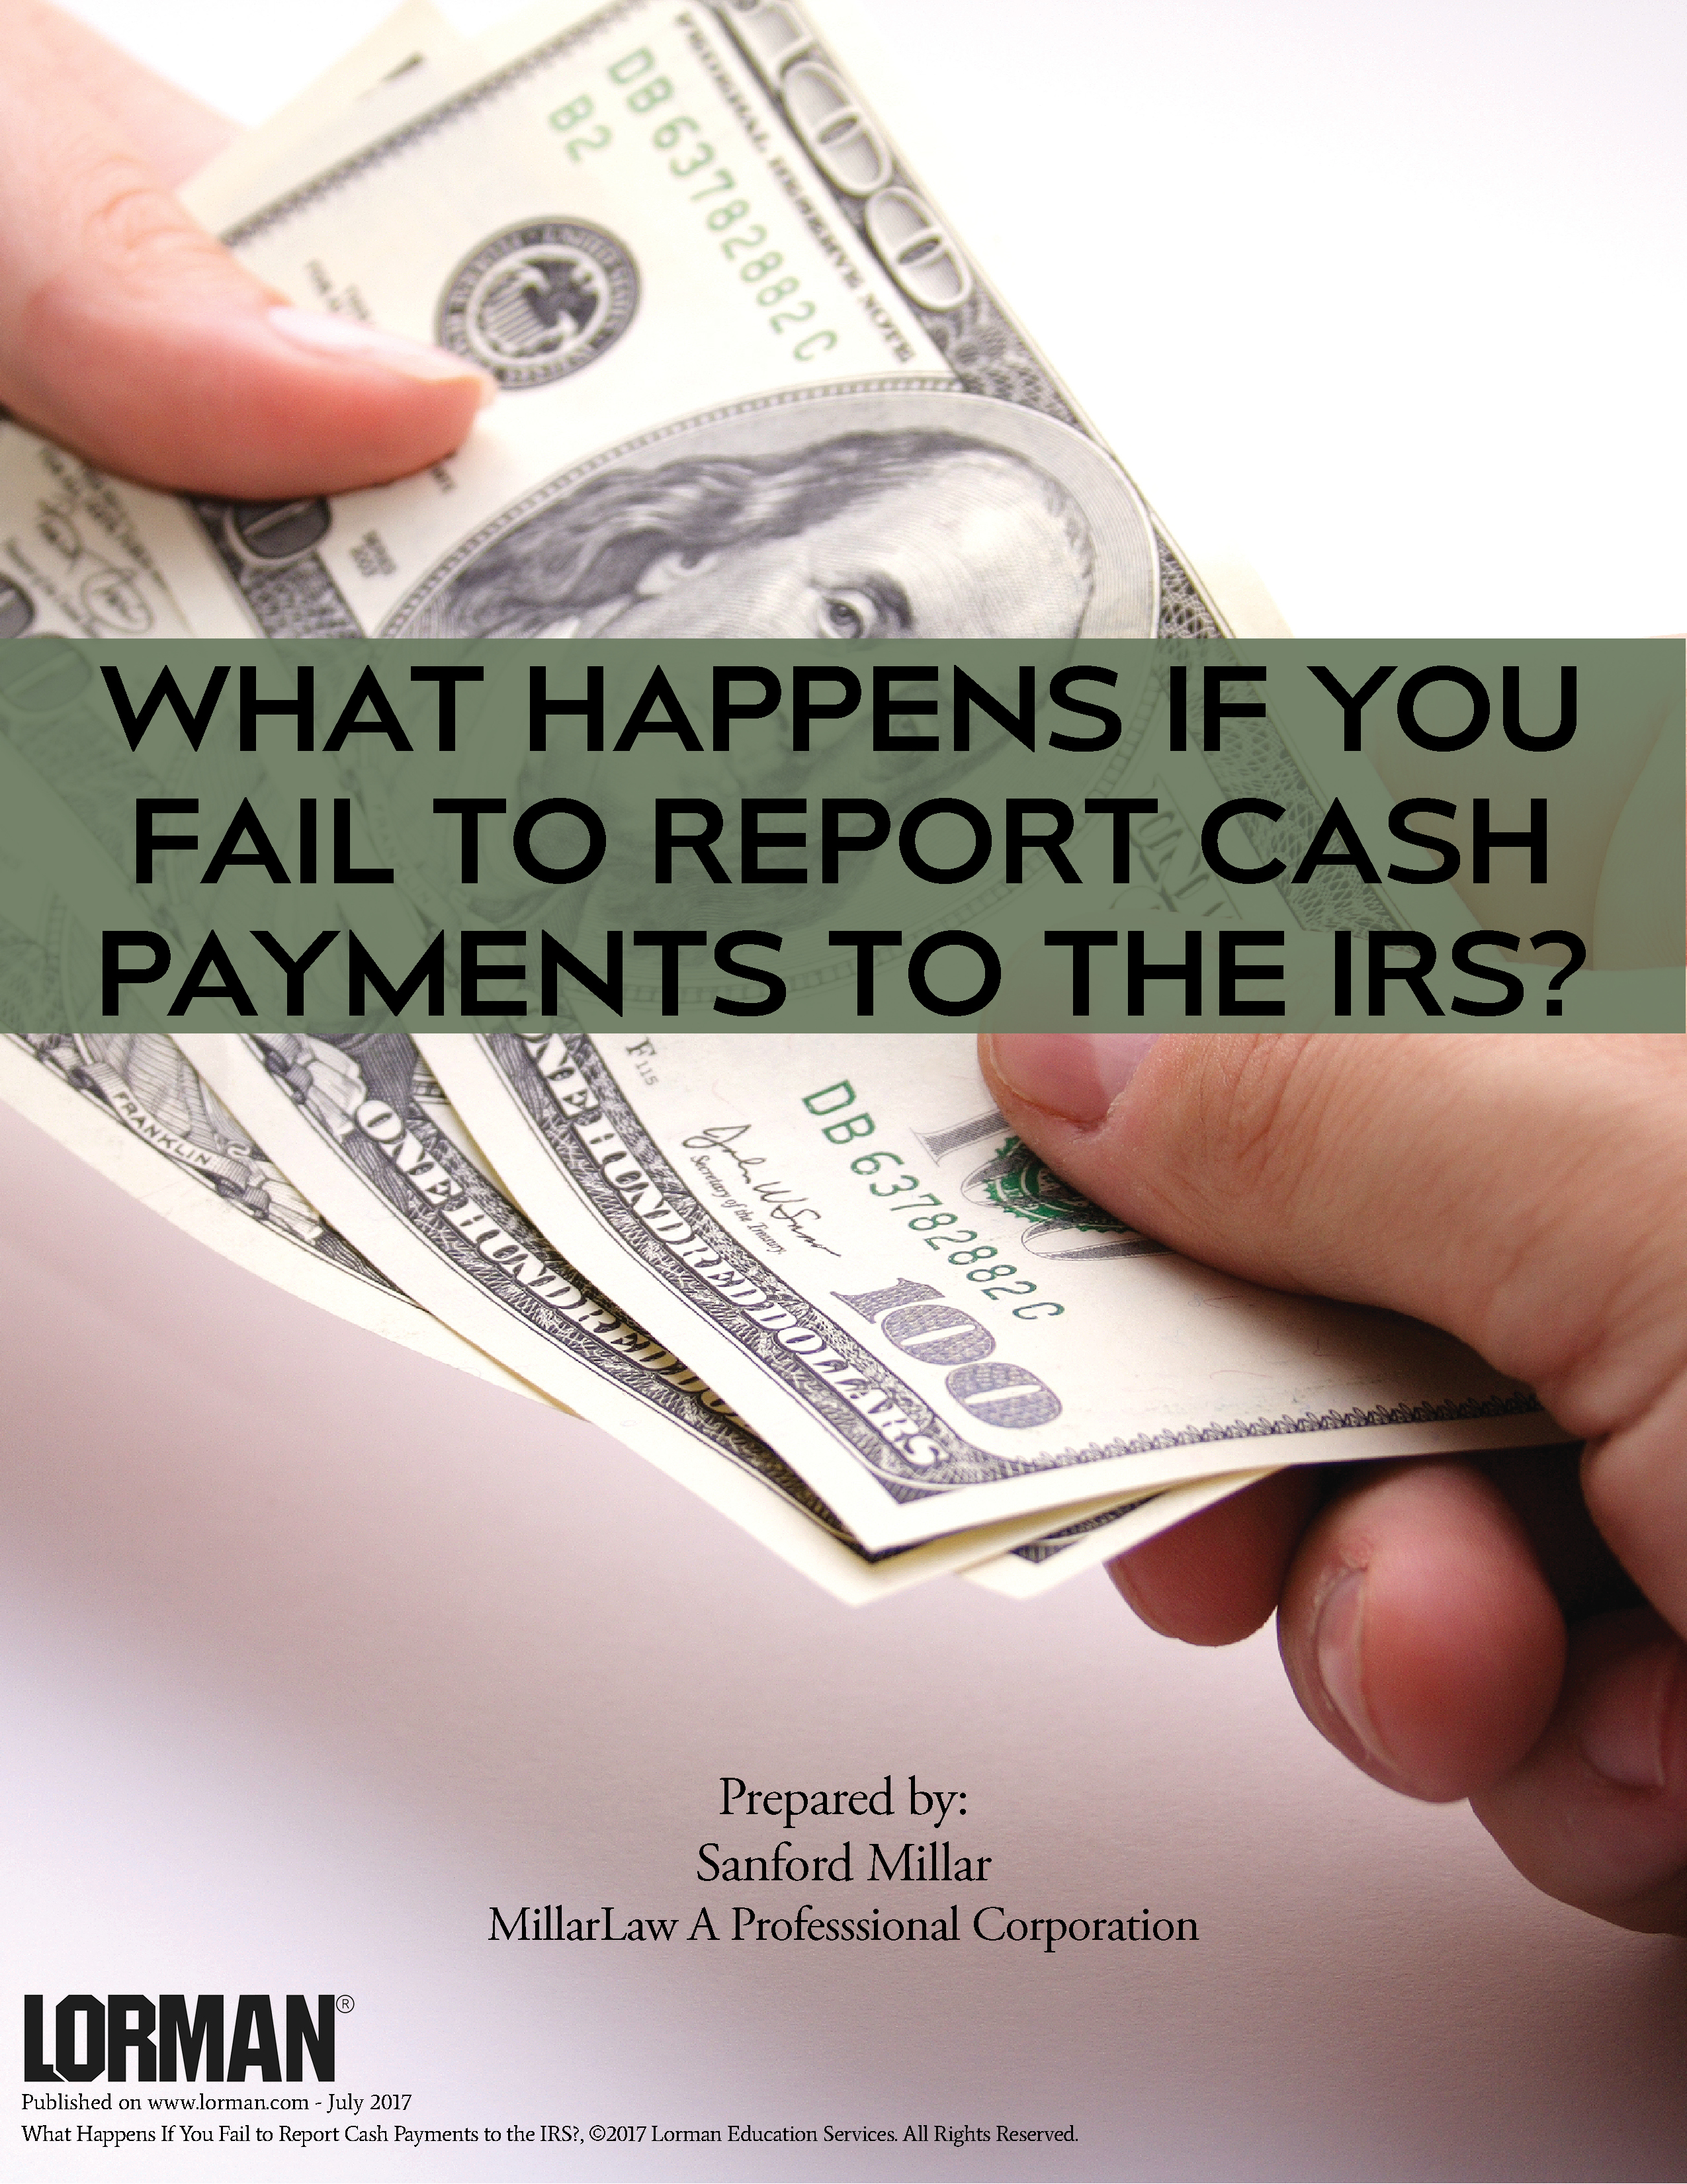 What Happens If You Fail to Report Cash Payments to the IRS?